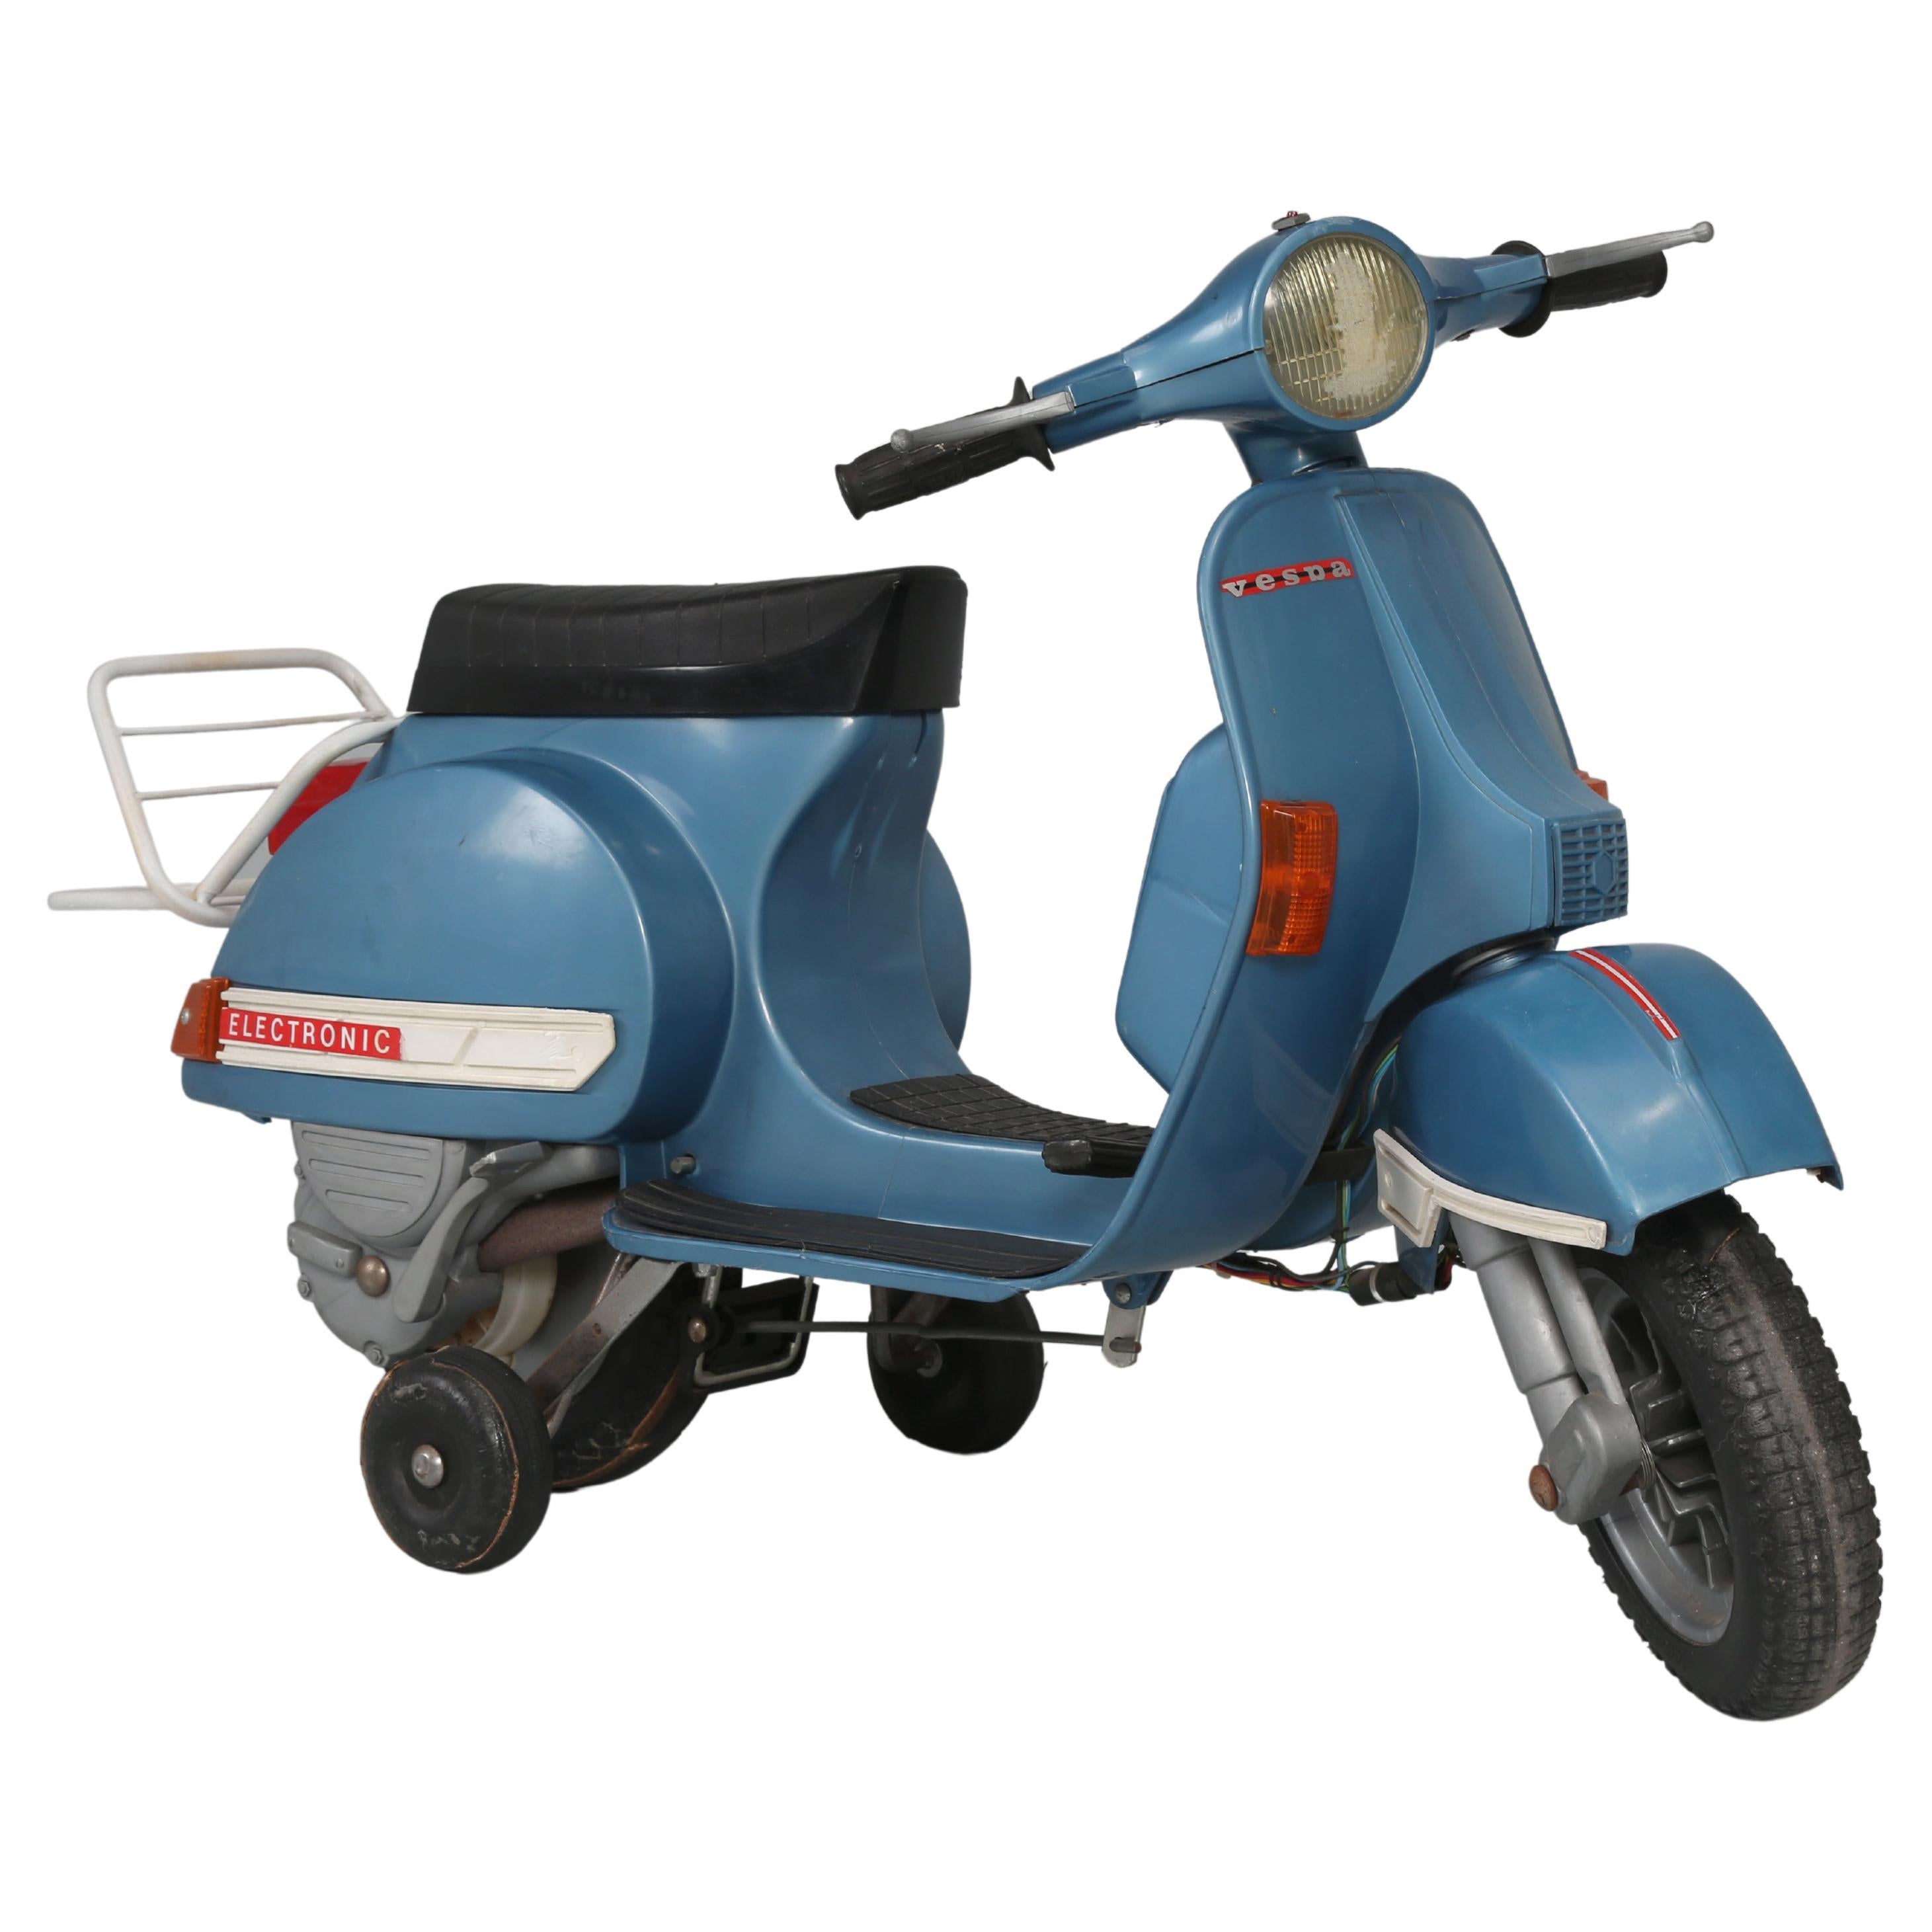 Child's Battery Operated Vespa Scooter Made in Italy by Peg Perego for Ages 3-Up For Sale at | peg perego vespa 12 volt, vespa peg perego